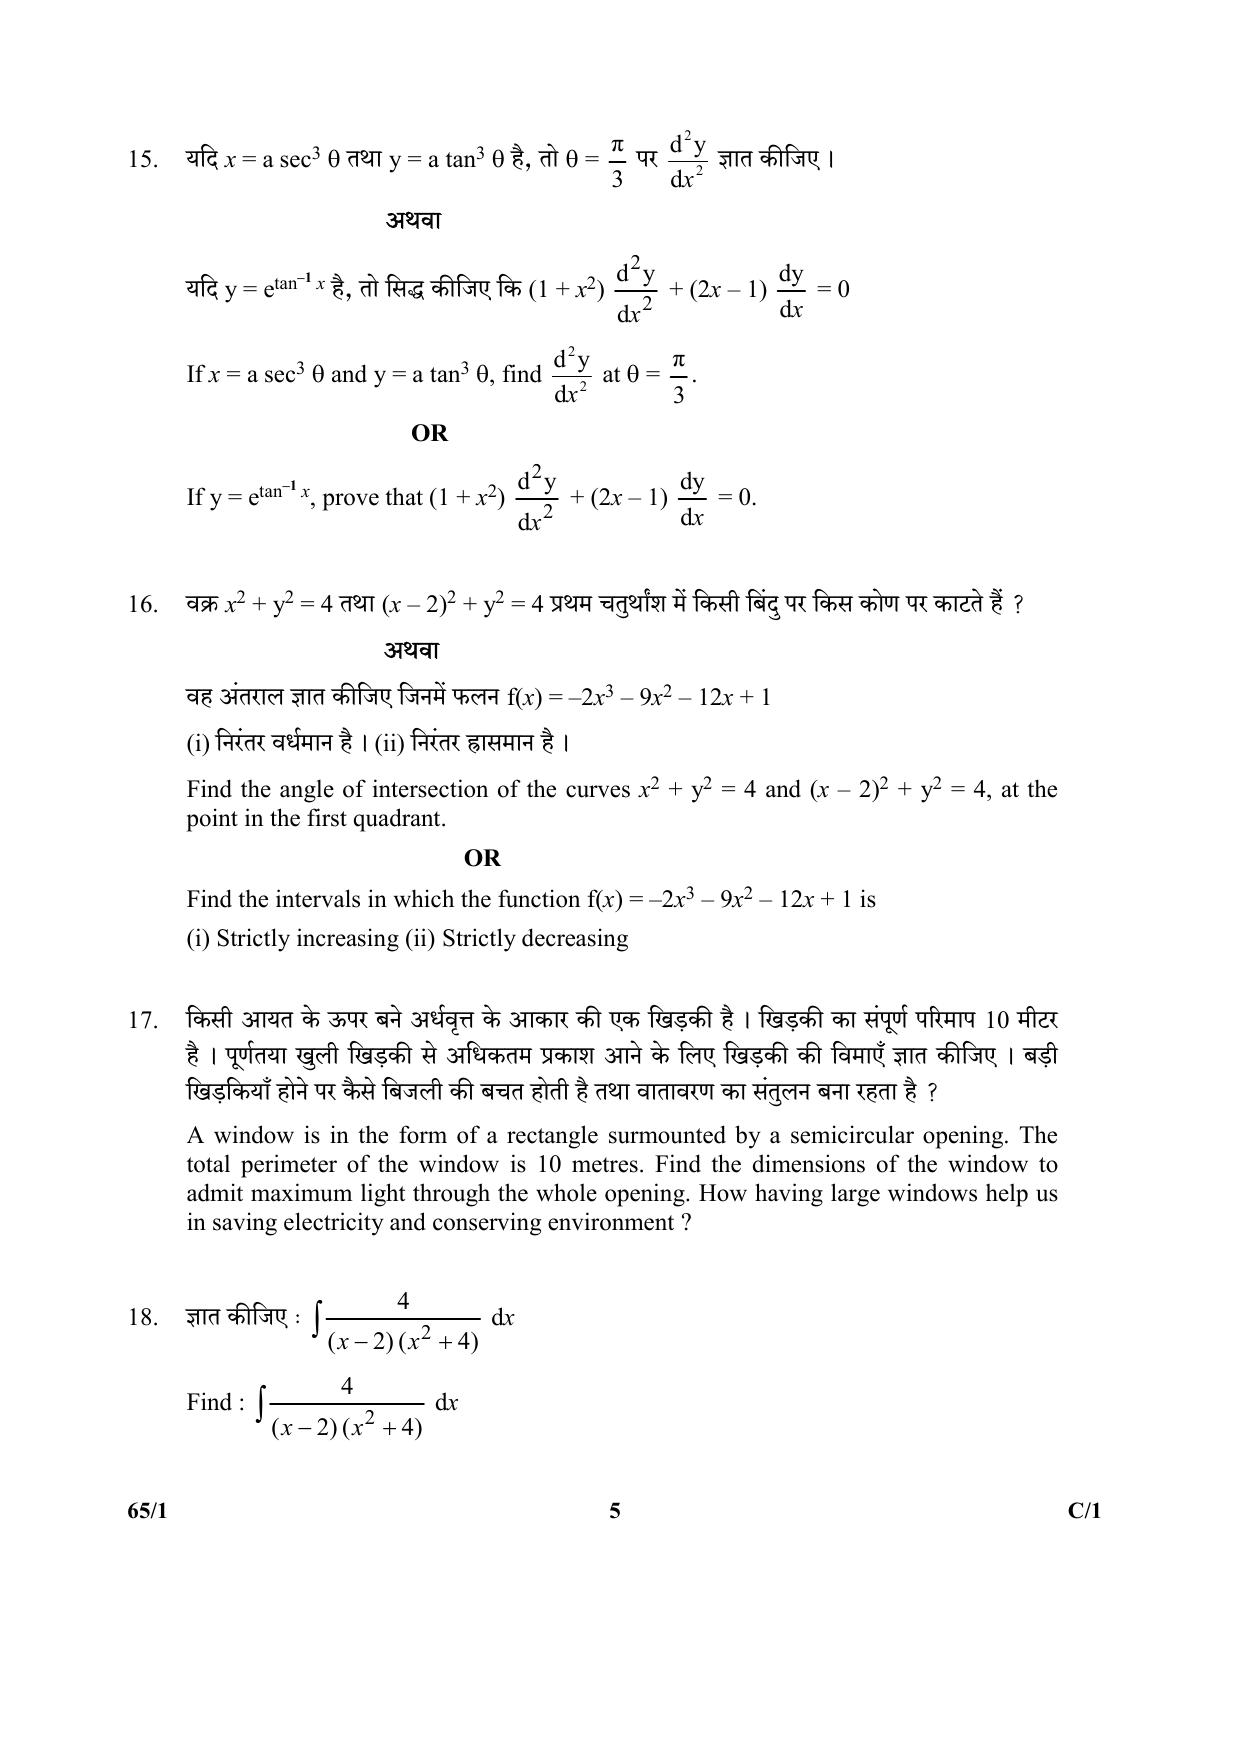 CBSE Class 12 65-1 (Mathematics) 2018 Compartment Question Paper - Page 5